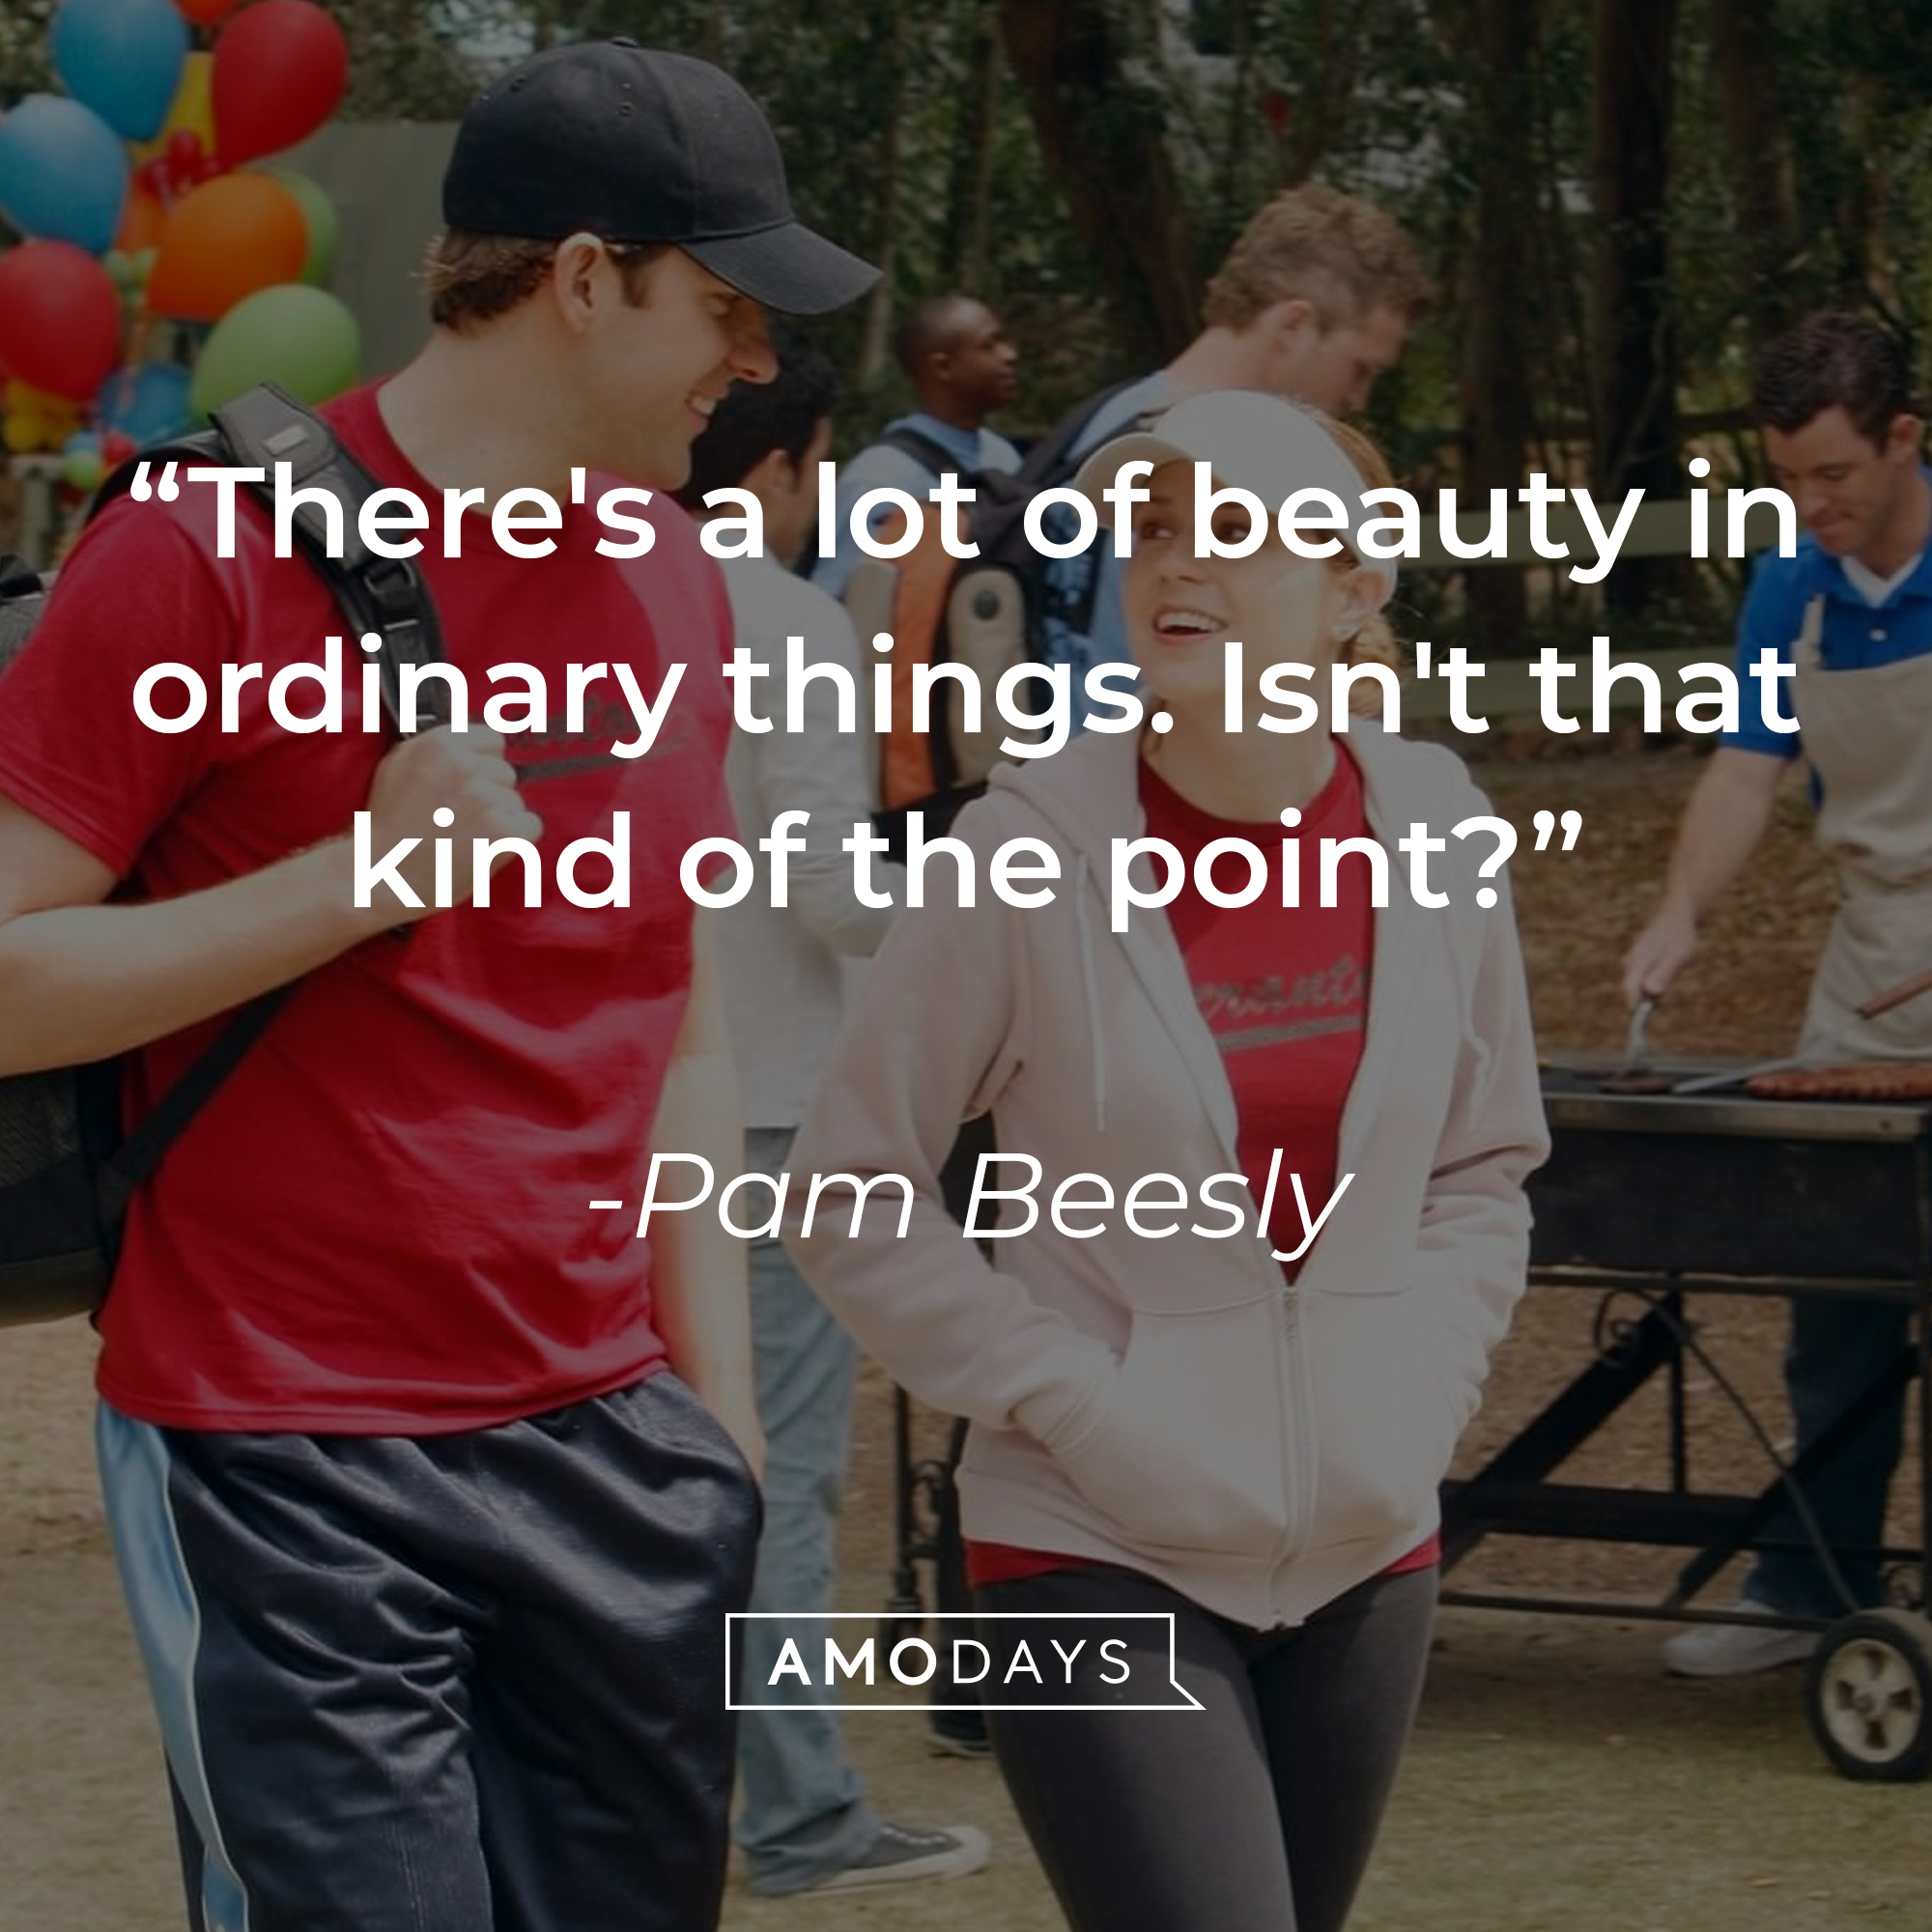 Pam Beesly's quote, "There's a lot of beauty in ordinary things. Isn't that kind of the point?" | Source: Facebook/TheOfficeTV